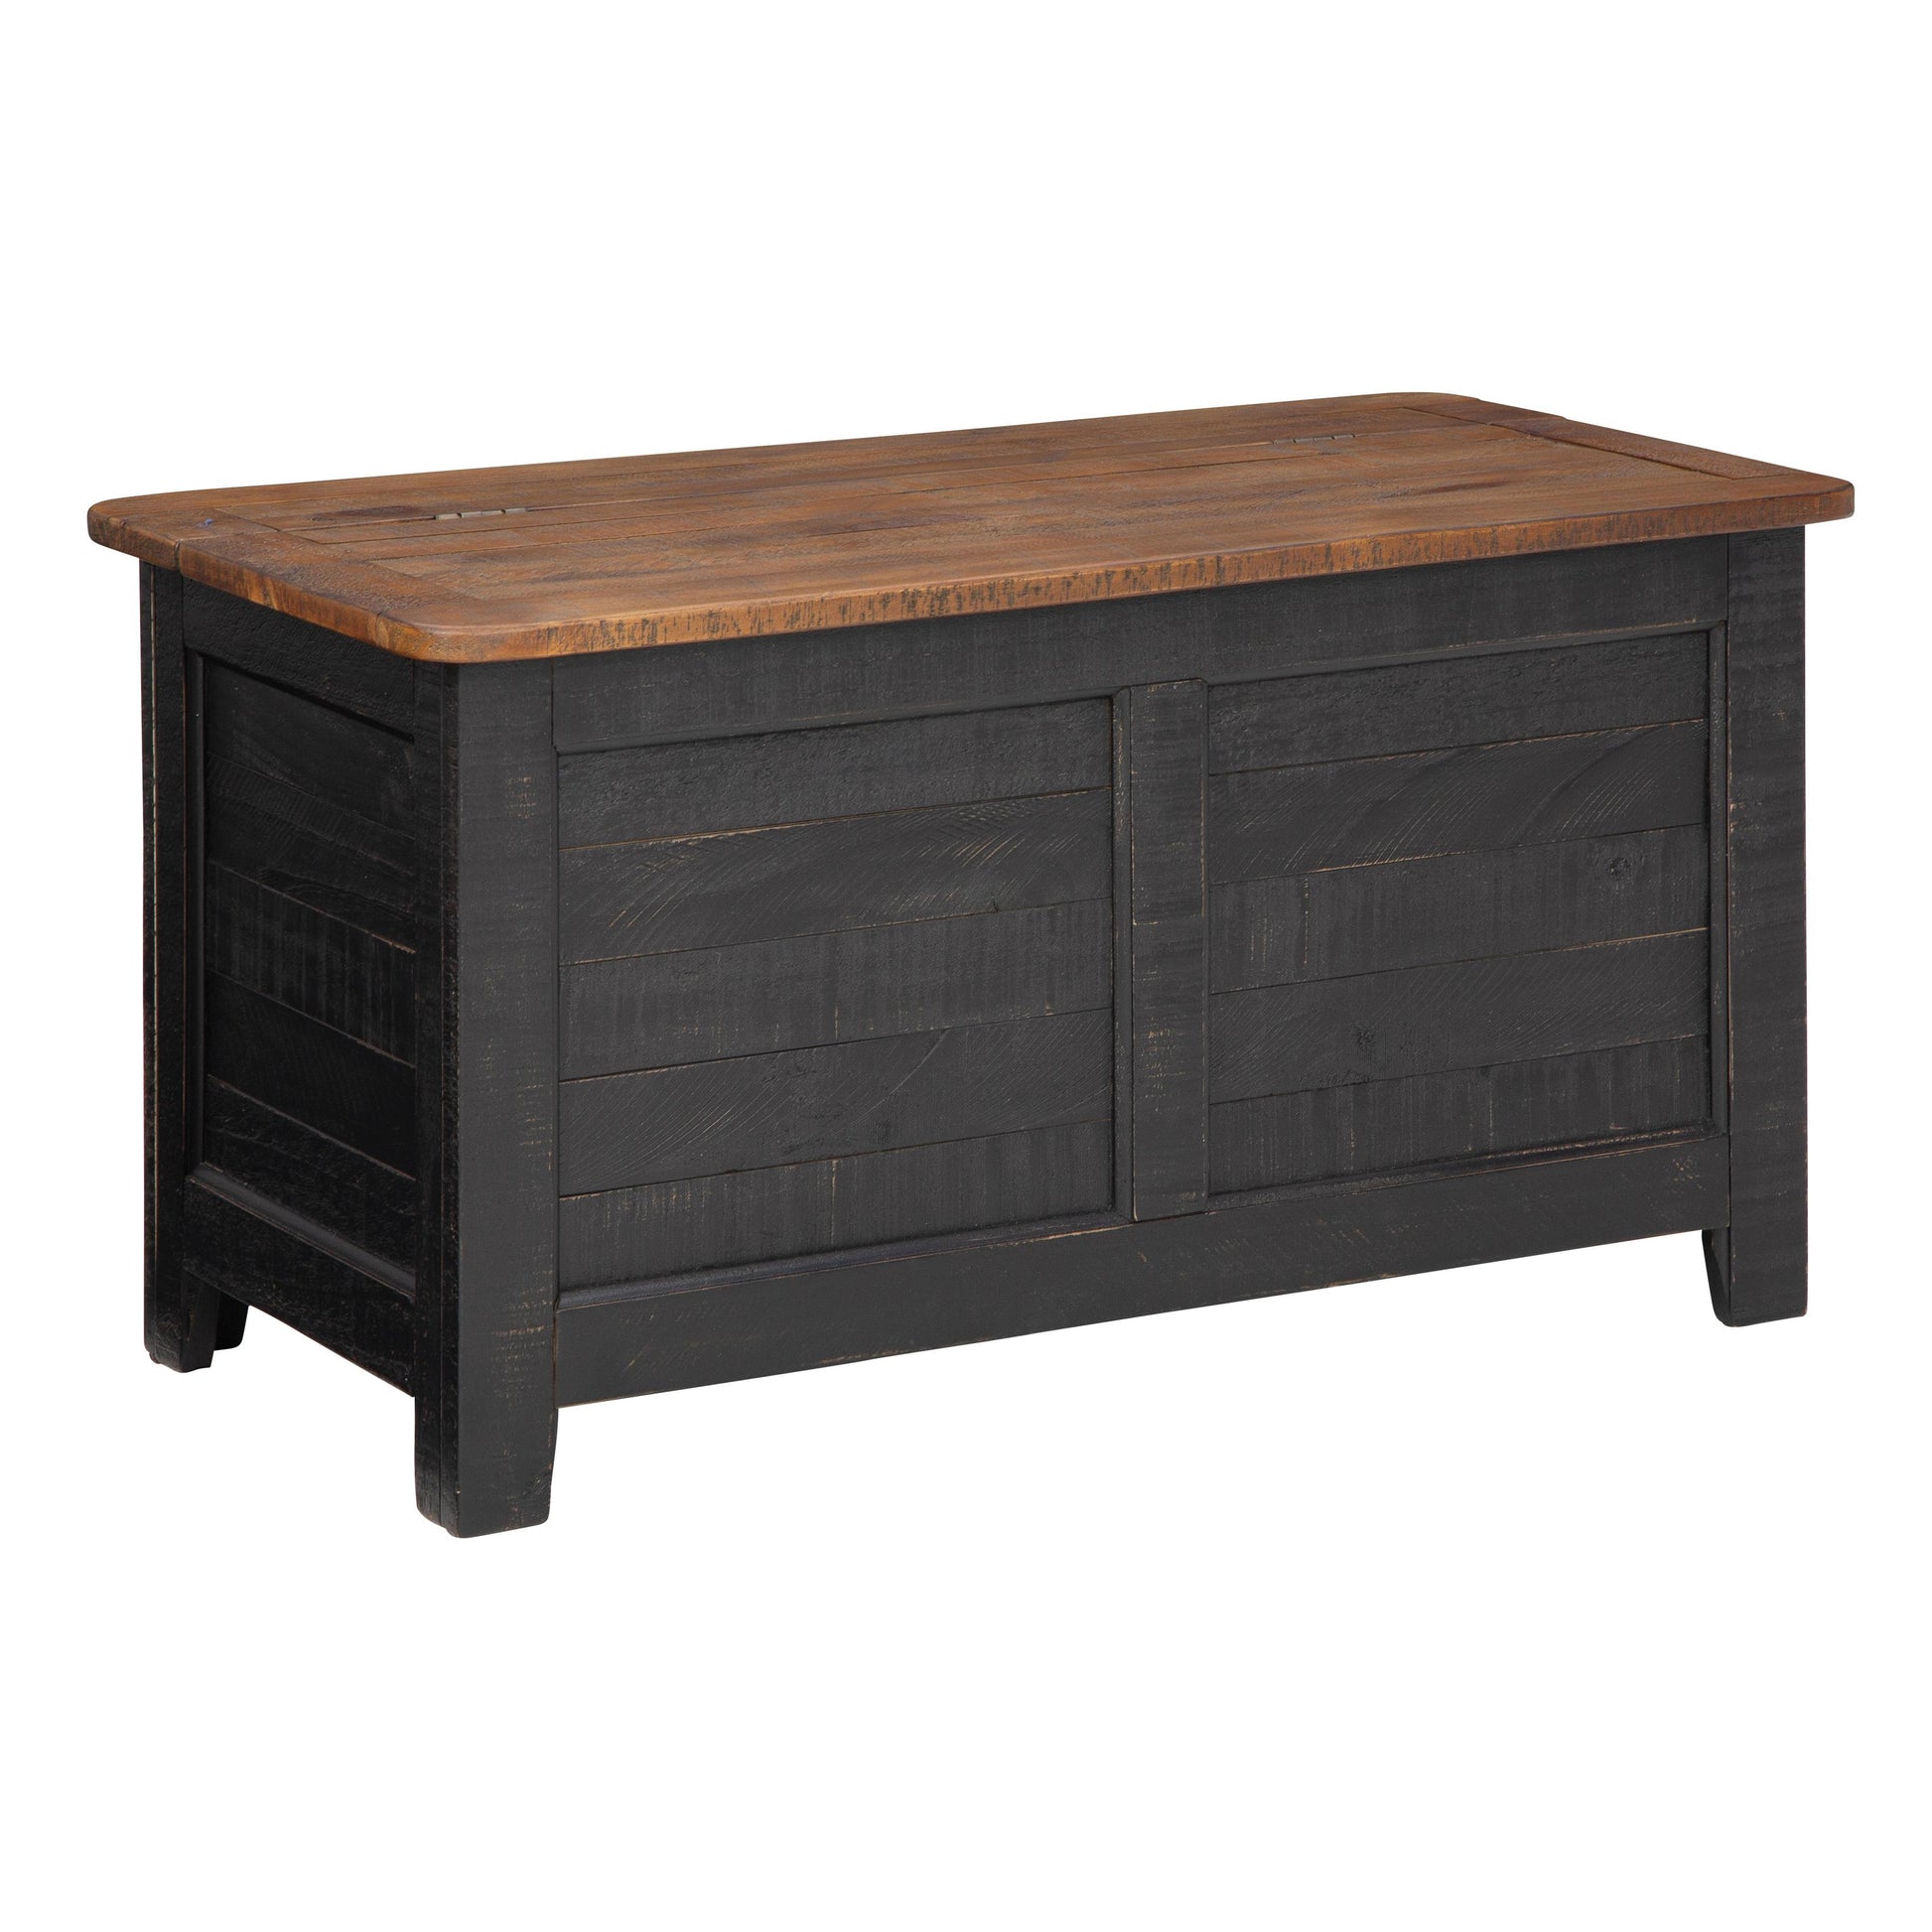 Signature Design by Ashley Home Decor Chests A4000320 IMAGE 1